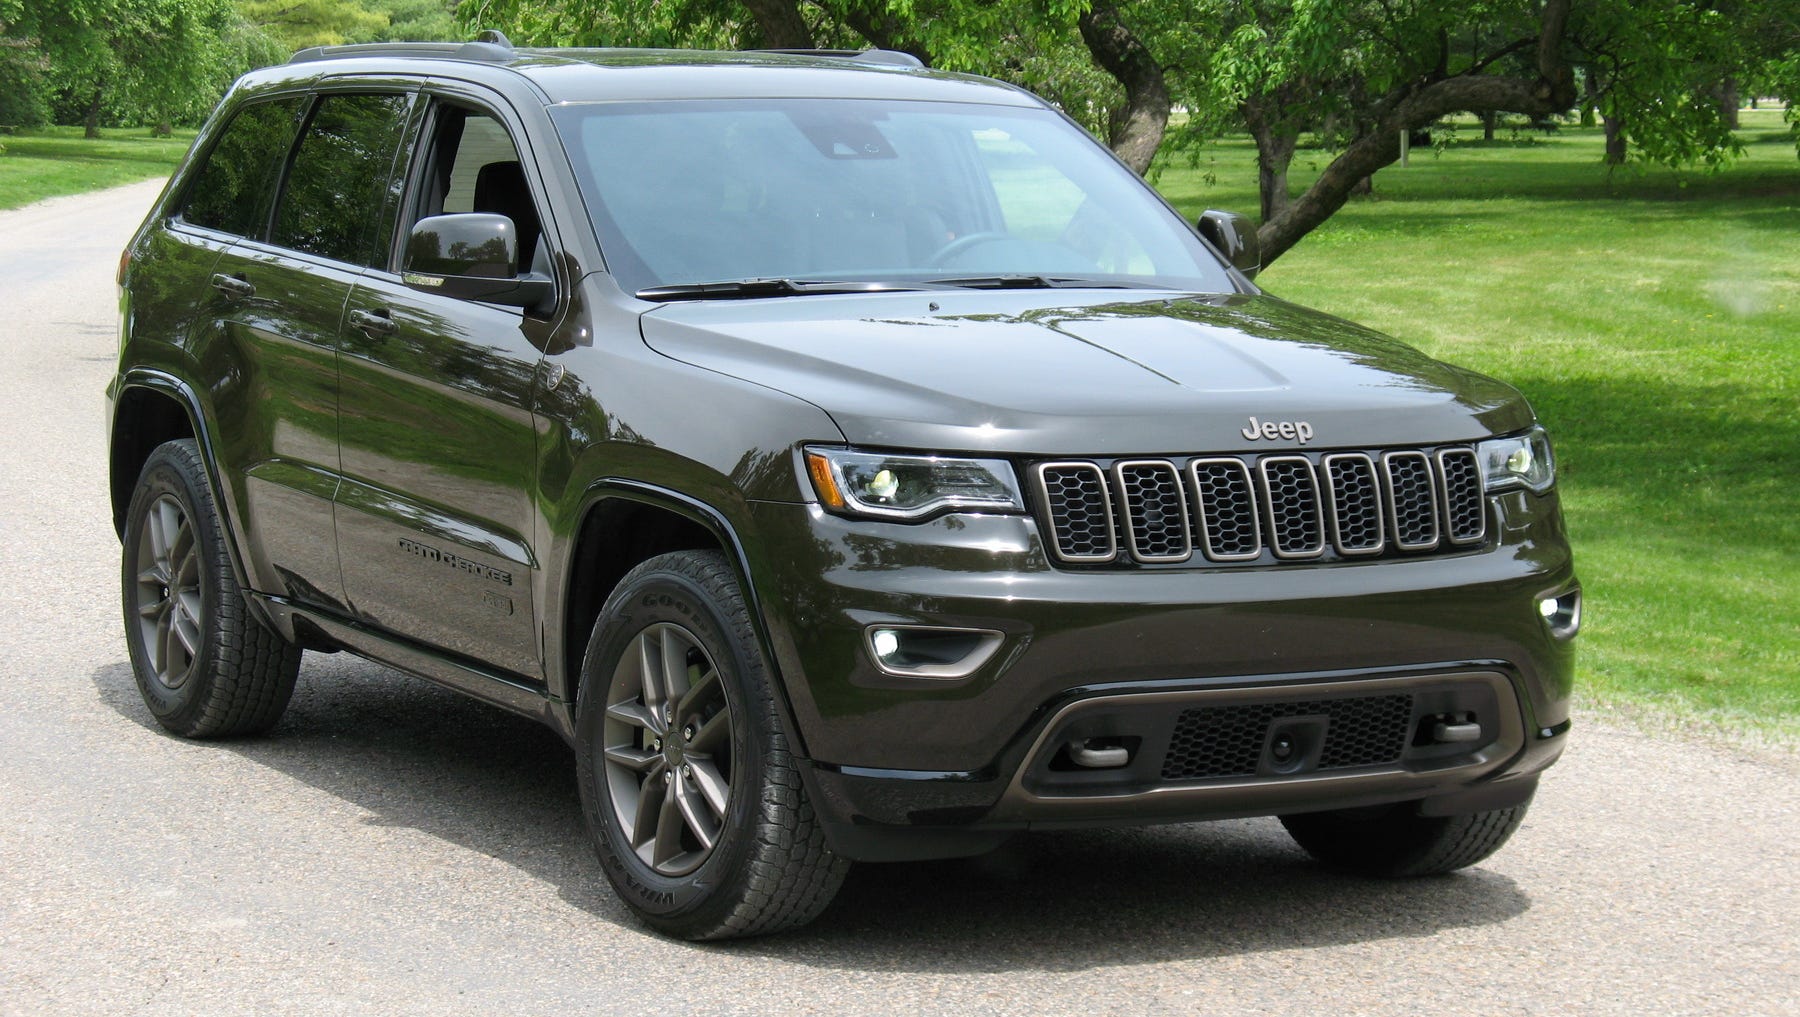 2016 Jeep Grand Cherokee has flagship features